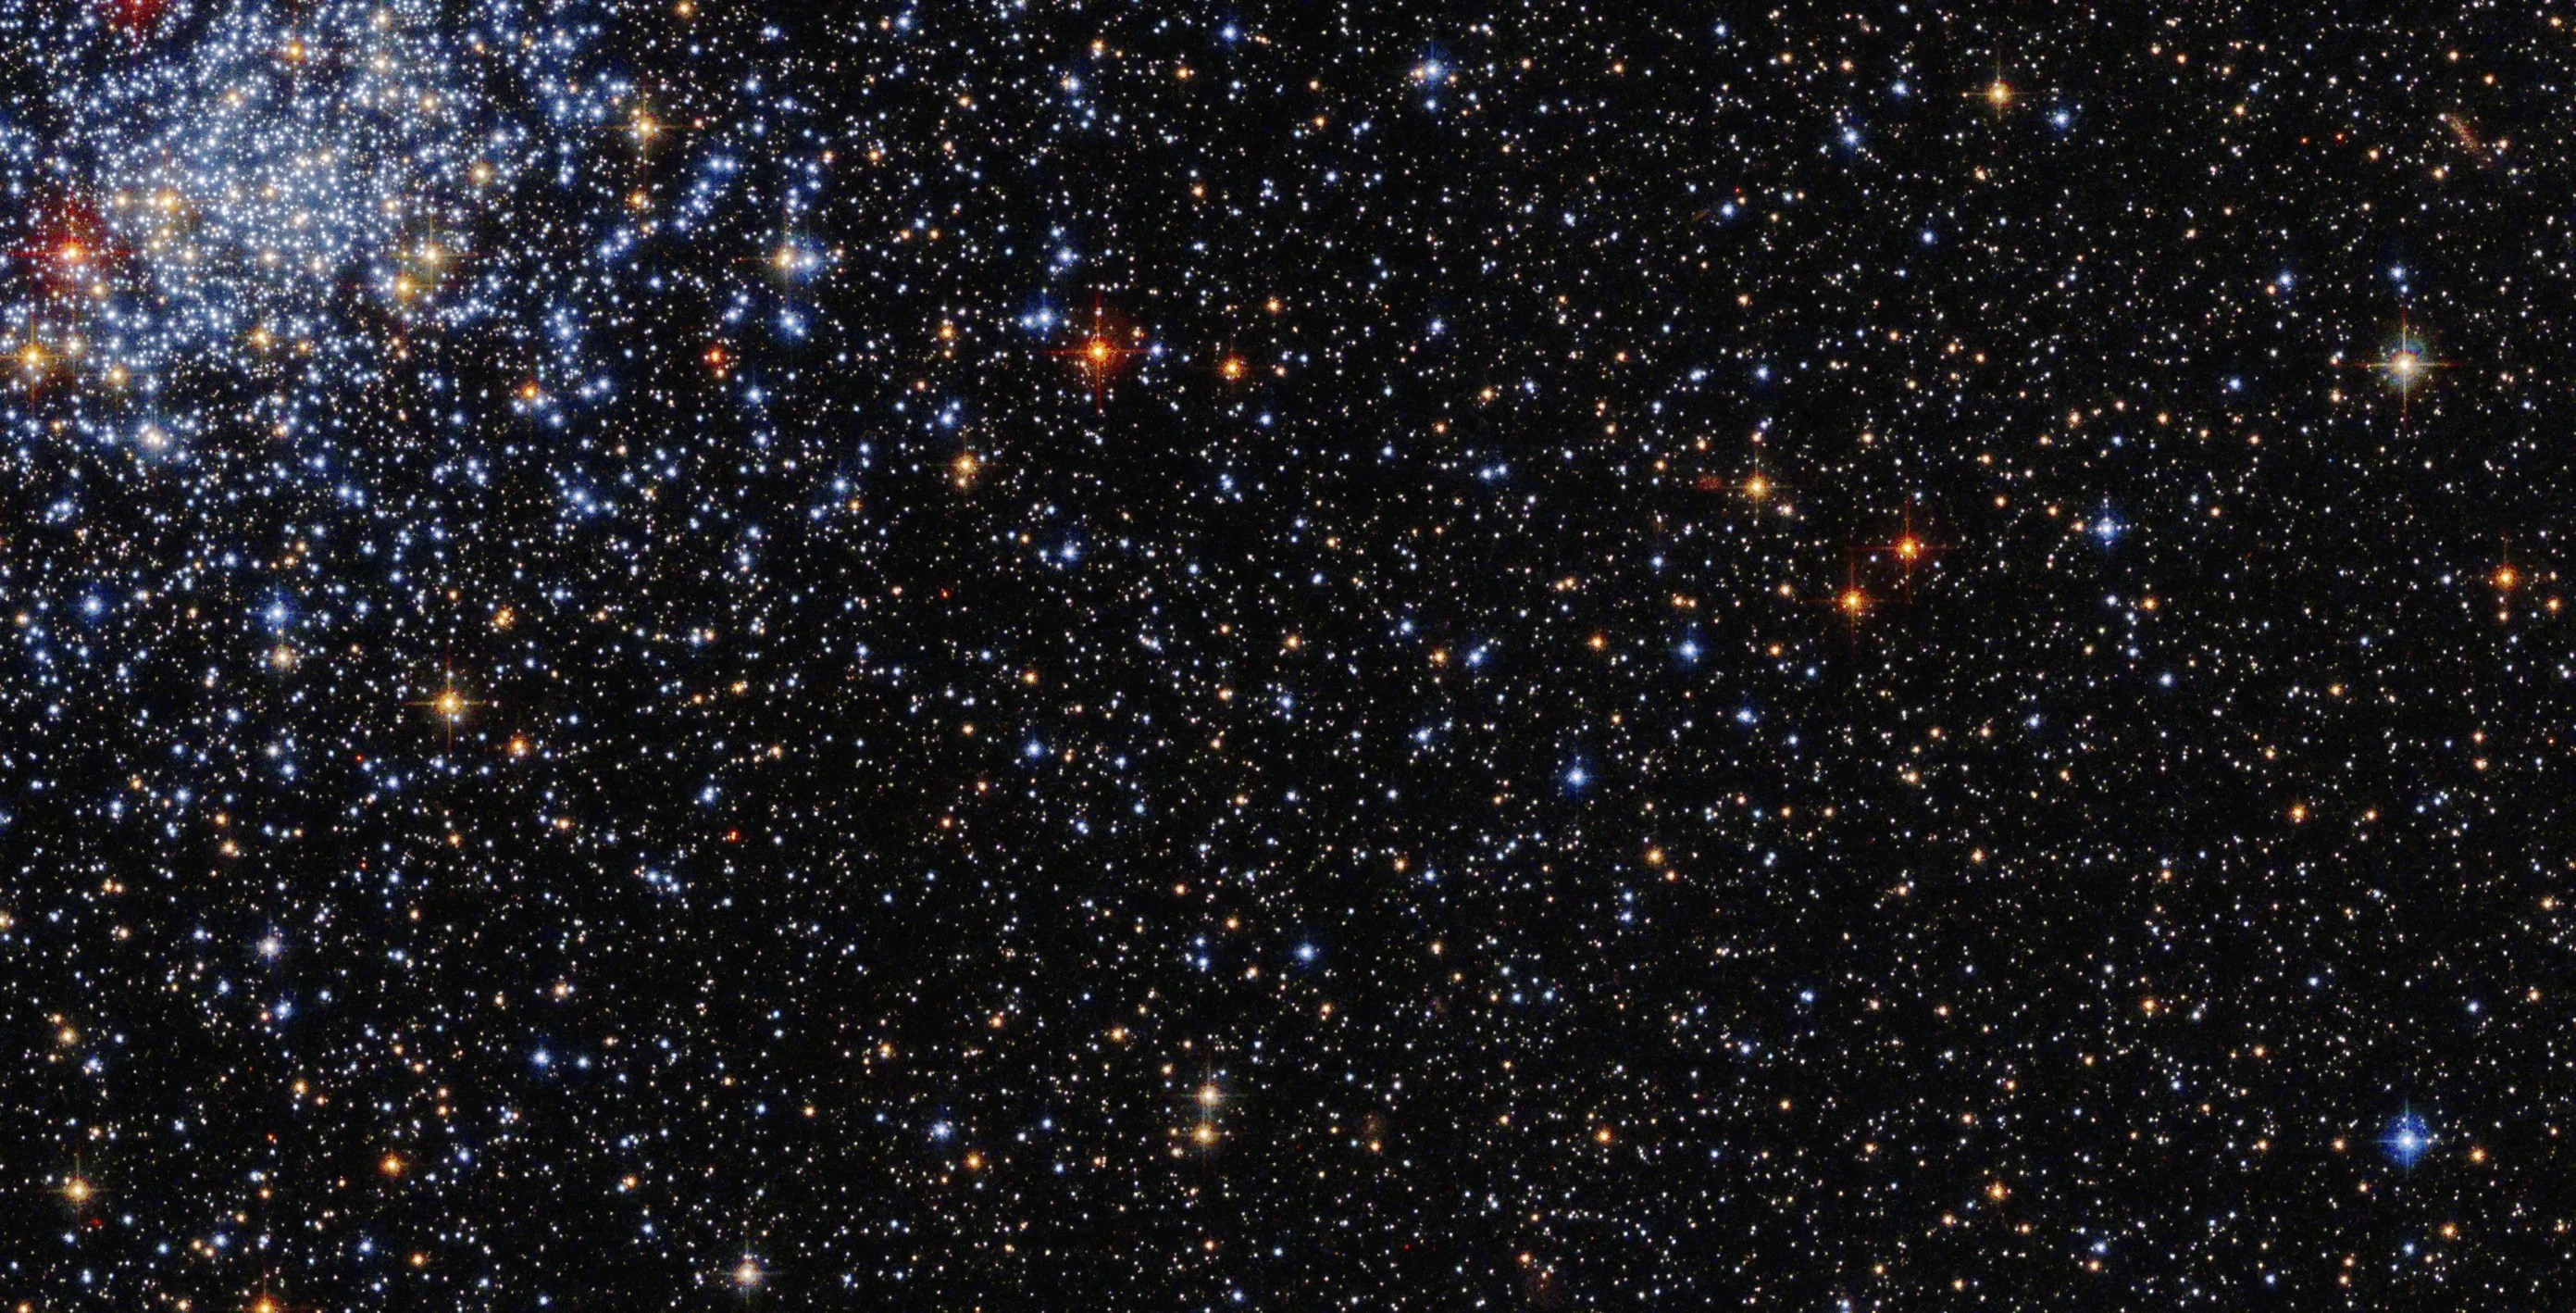 A burst of stars stand out in the upper left of this image from the Hubble Spun Space Telescope. The stars spred across the dark tapestry of space, in white, blue and red colors.